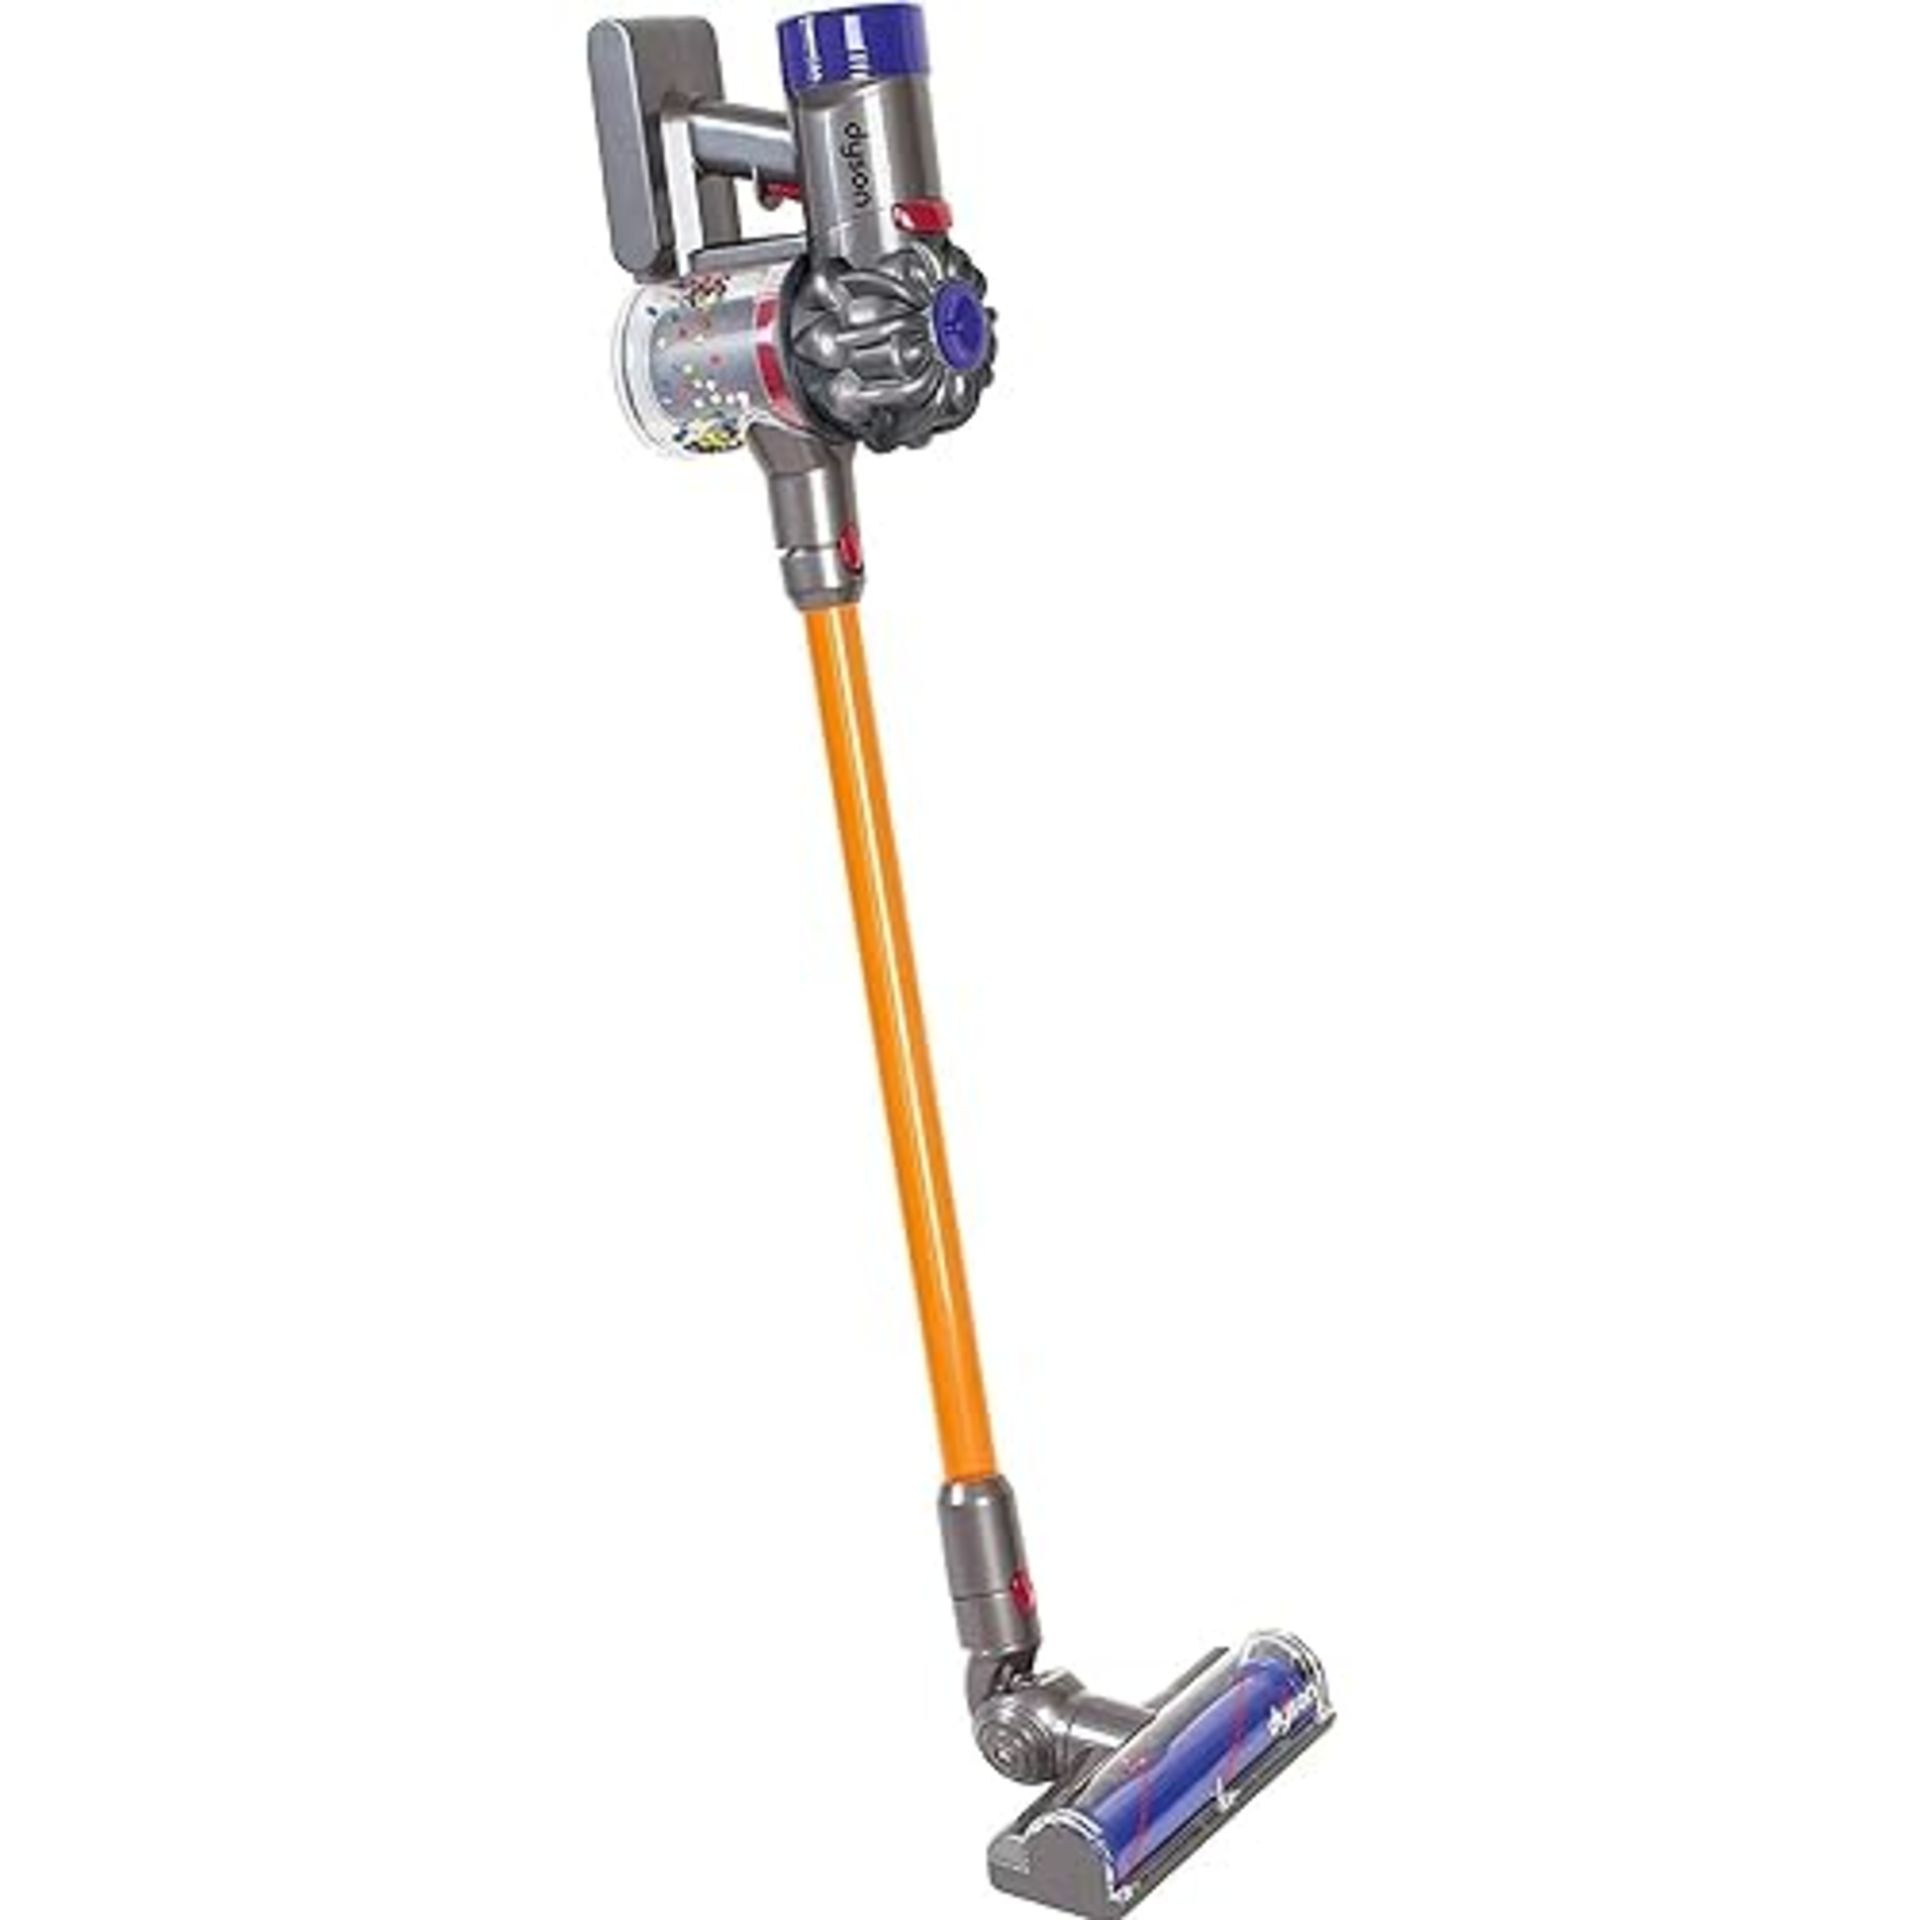 Casdon Dyson Toys. Cordless Vacuum Cleaner. Purple and Orange Interactive Toy Replica with Real Fun